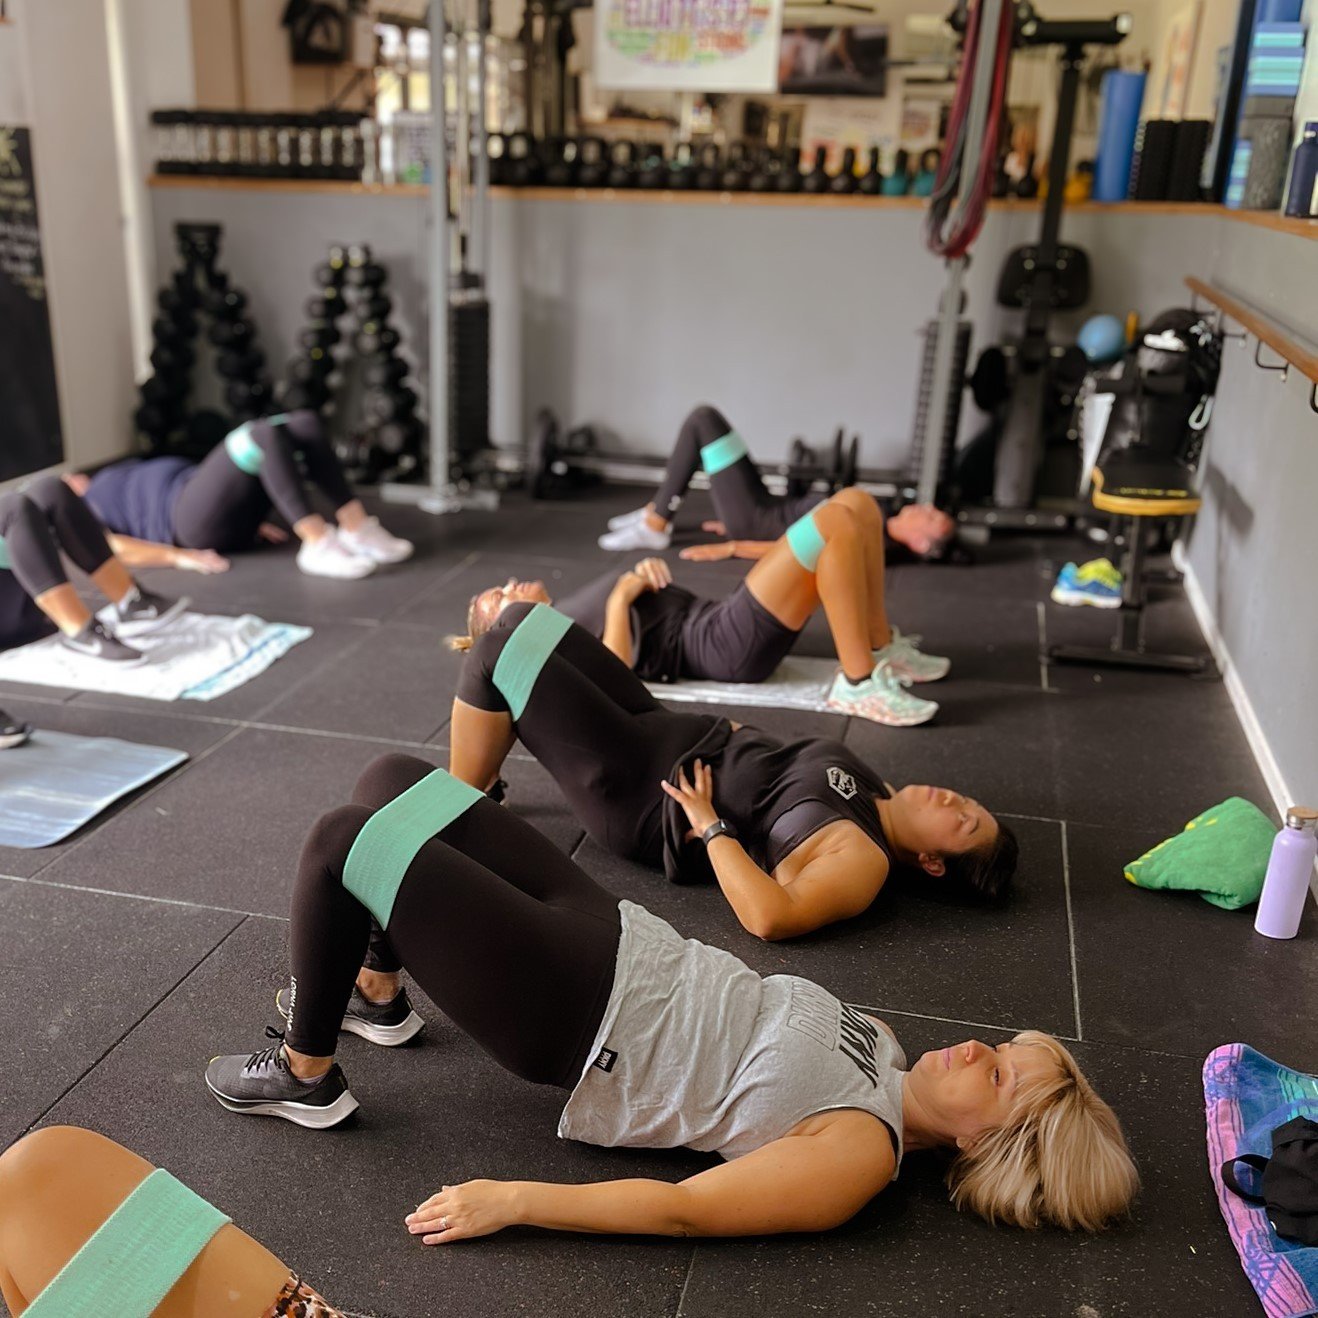 Experience the freedom of movement with mobility training! It's not just about flexibility; it's about breaking barriers and unlocking your limitless potential.

Our mobility classes are on Tuesday and Thursday from 5:00 to 6:00 PM!